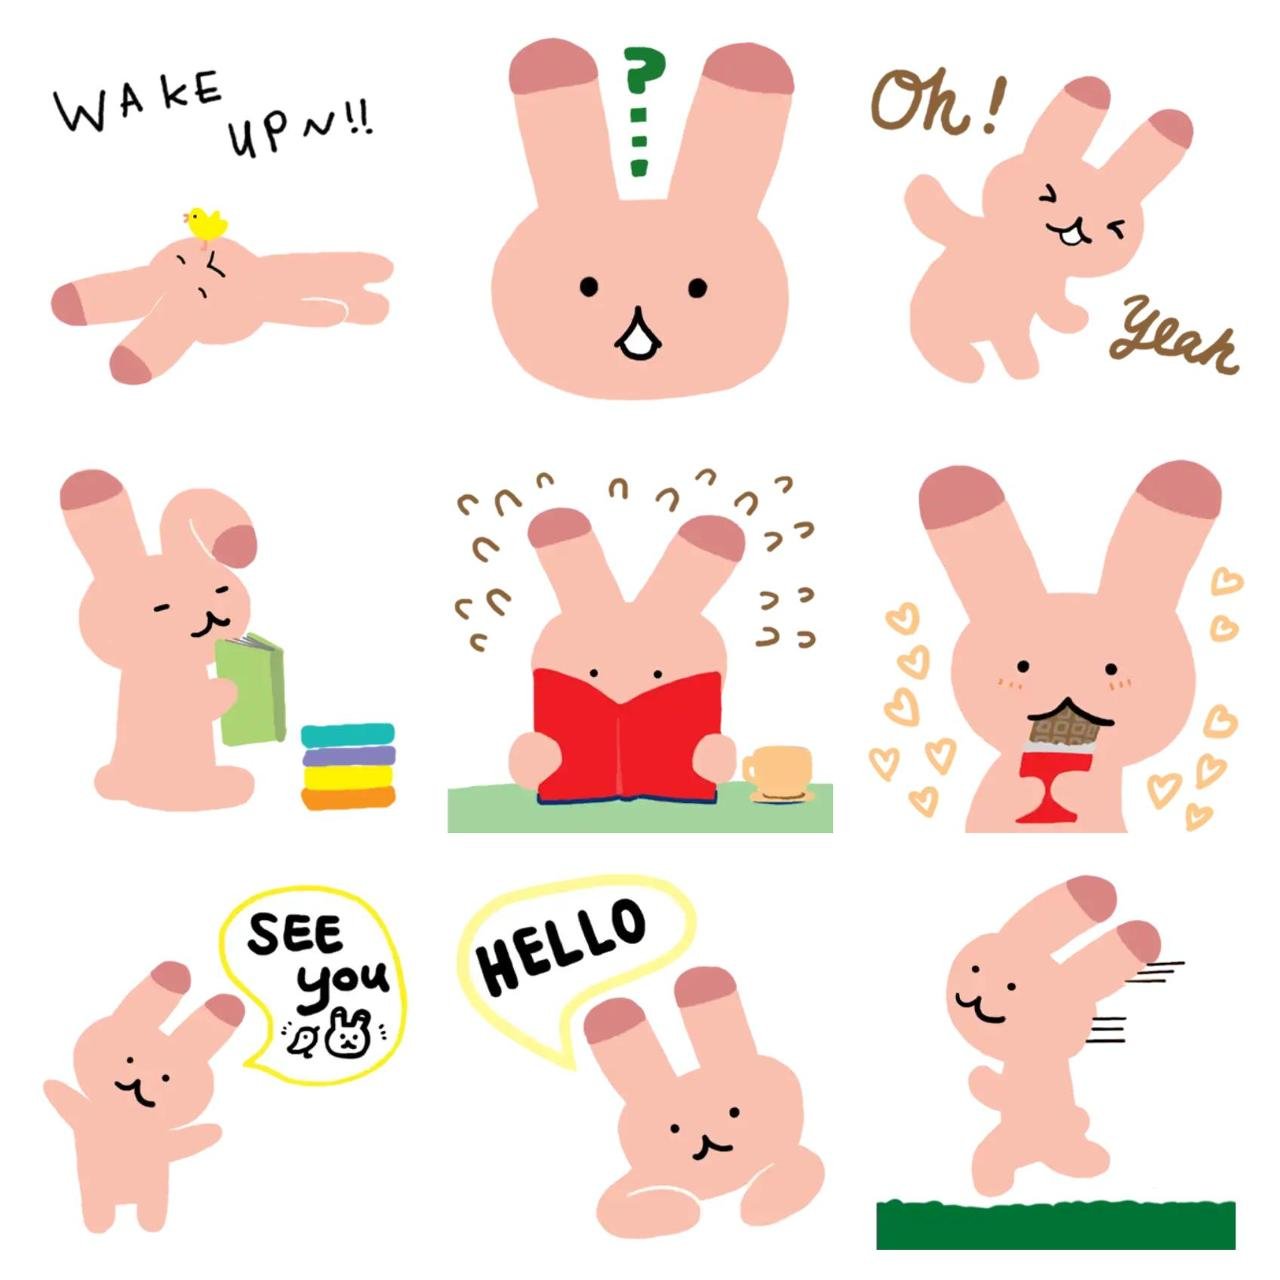 Sleepy Happy Rabbit Soo Animation/Cartoon,Animals sticker pack for Whatsapp, Telegram, Signal, and others chatting and message apps